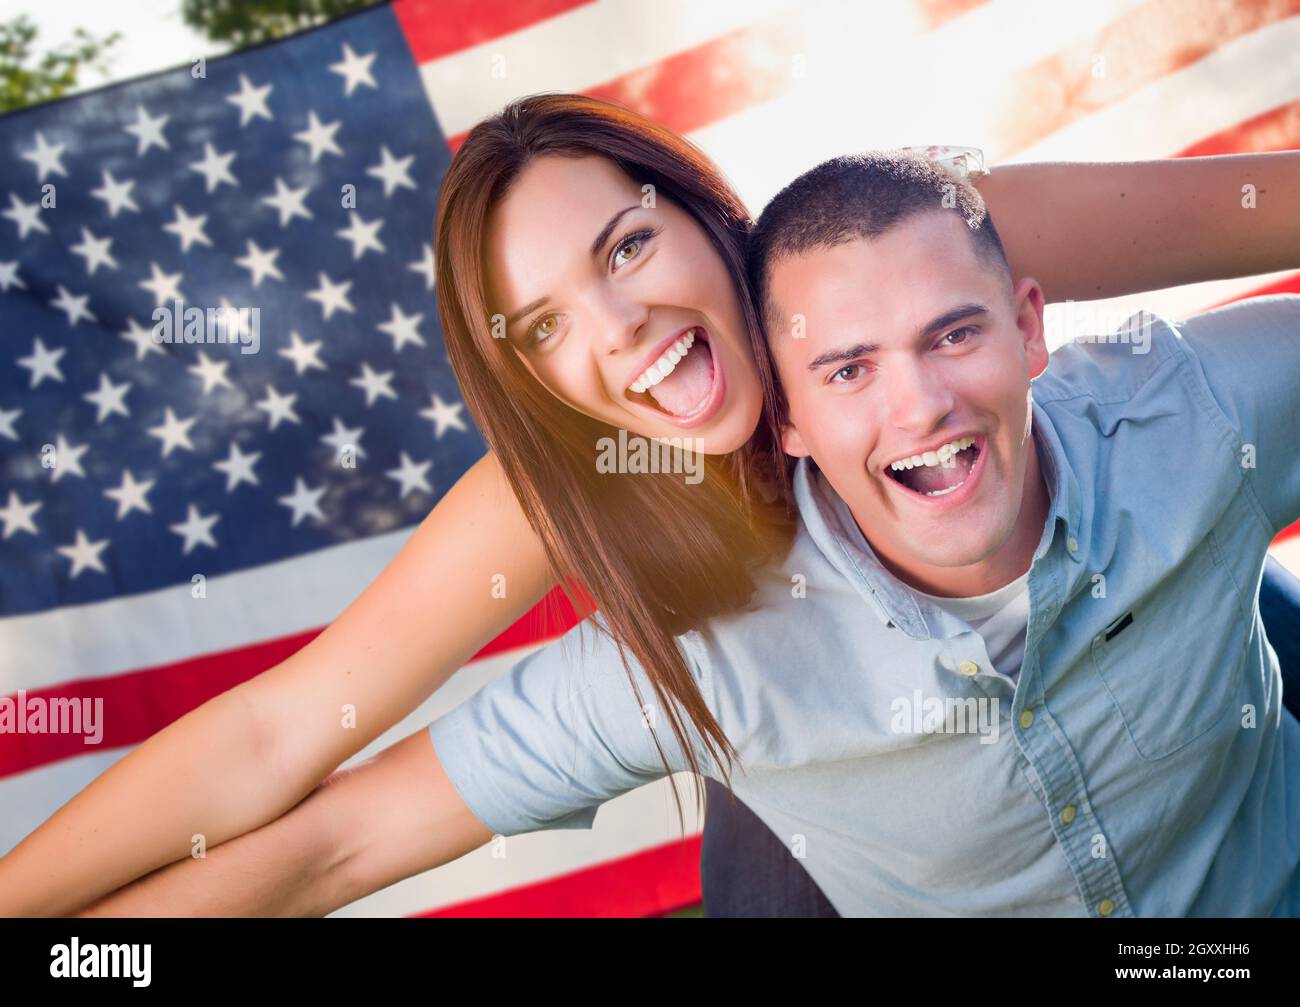 Military Couple Piggy Riding In Front of American Flag Stock Photo